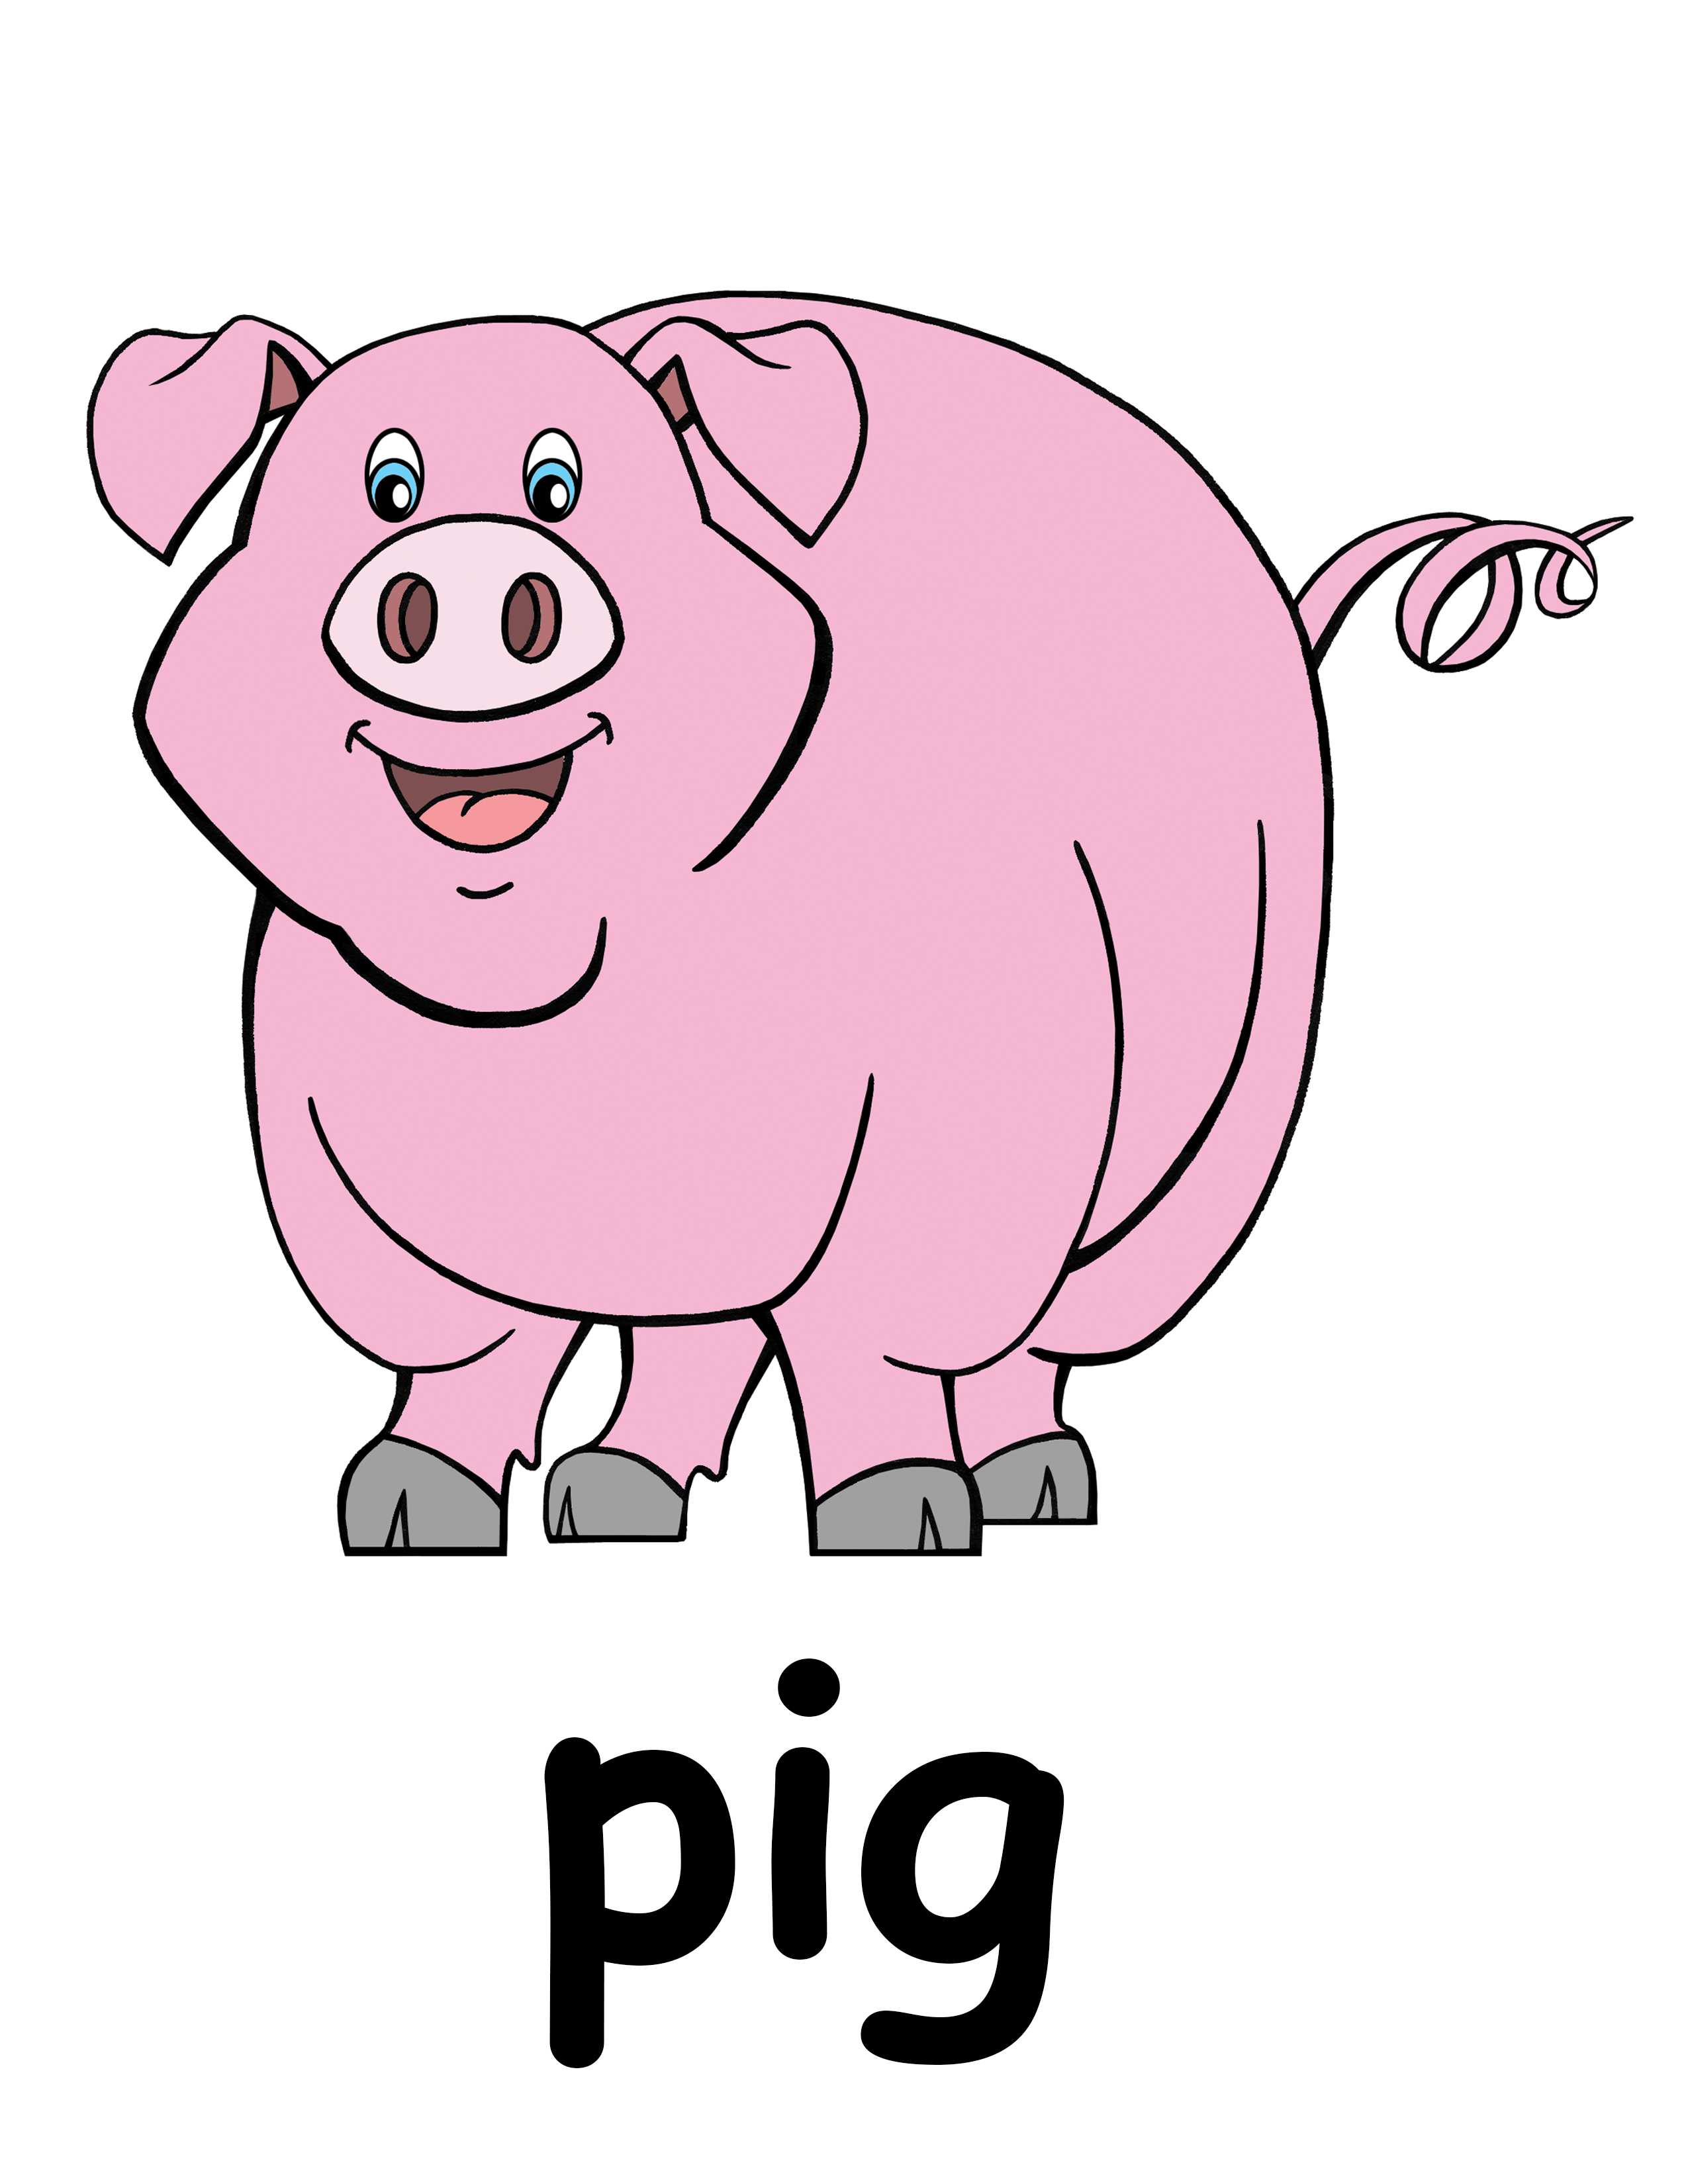 free vector pig clipart - photo #33